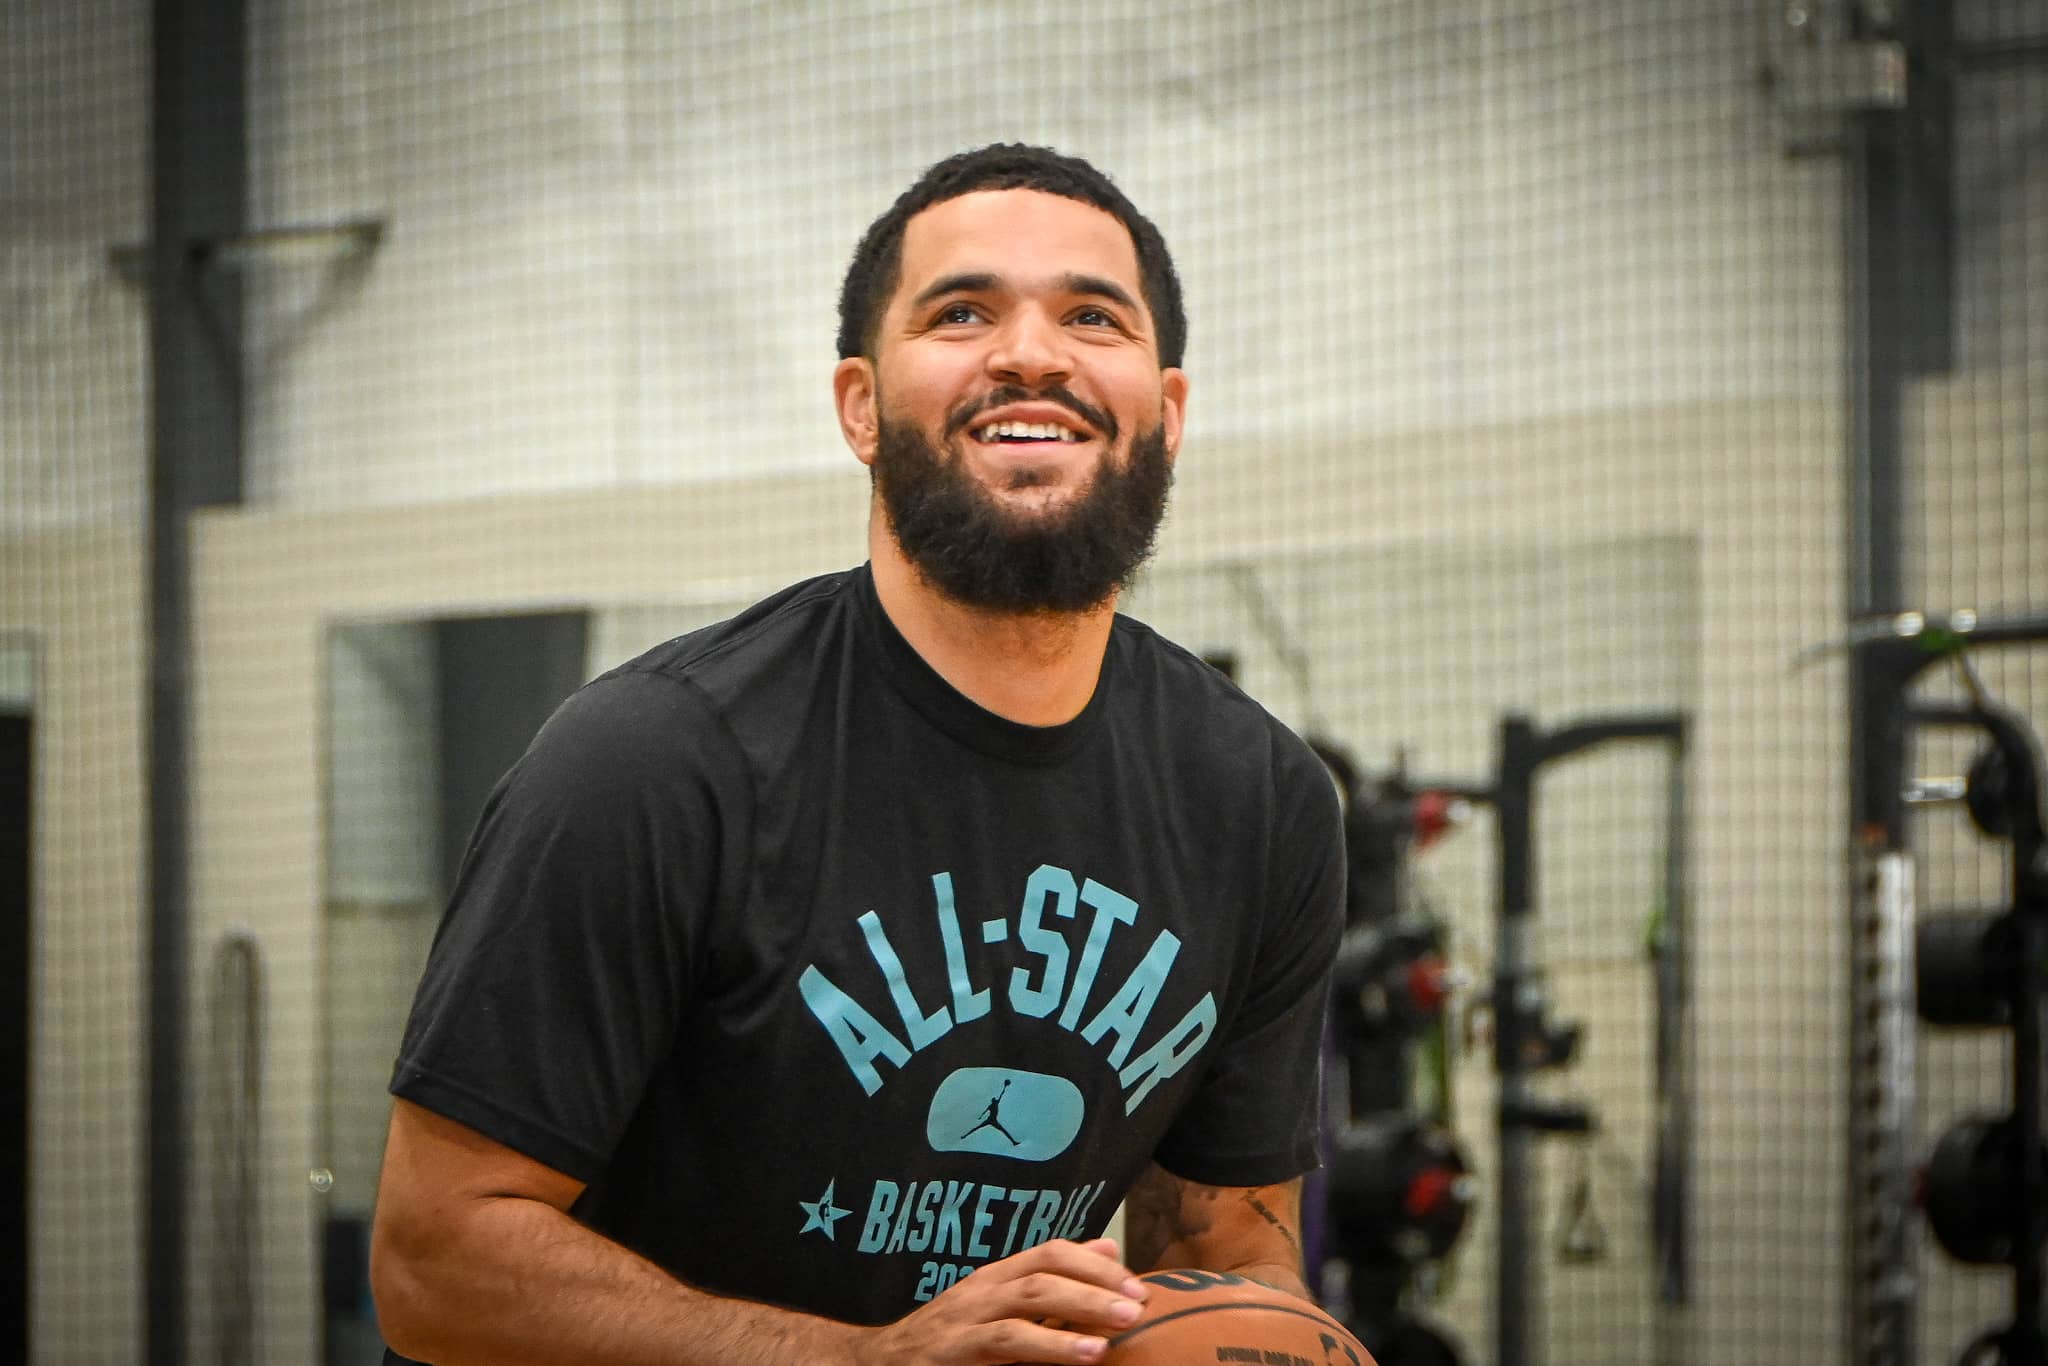 Retiring from the NFL to Pursue Ministry - Khari Willis' Story